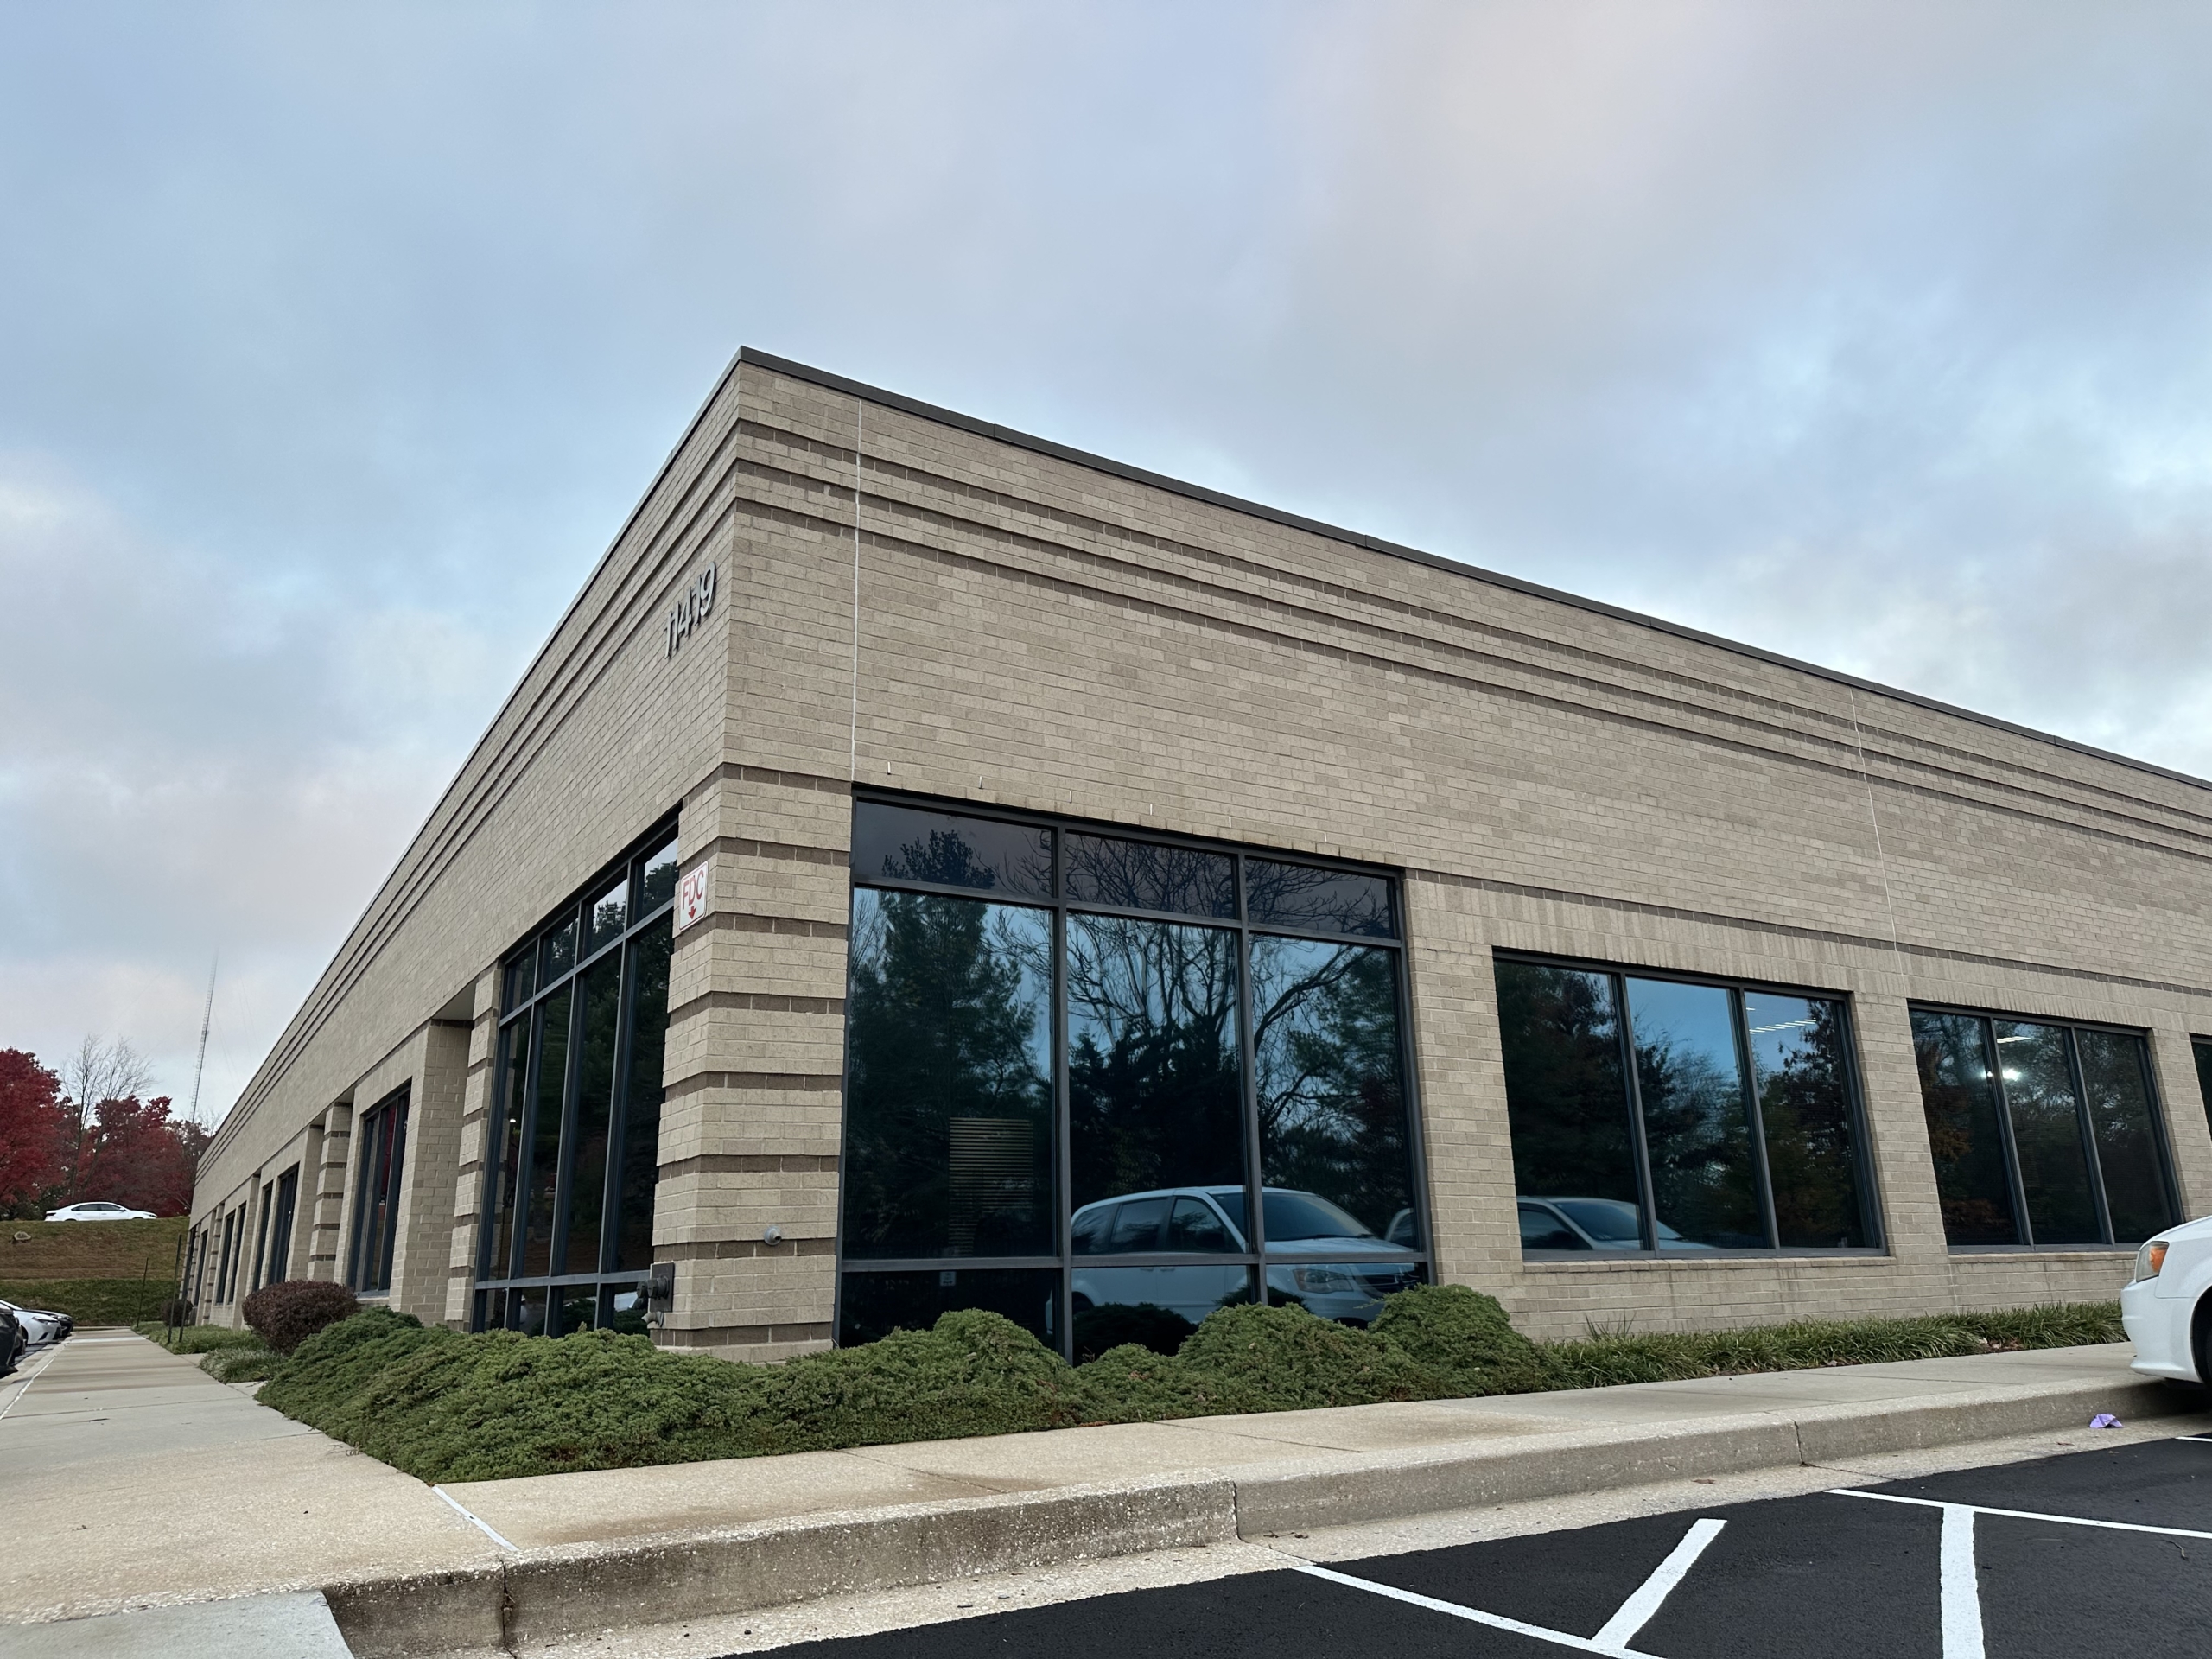 Center 1000 11419 Cronridge Drive Owings Mills, Maryland Office for Lease Gardner Commercial Realty